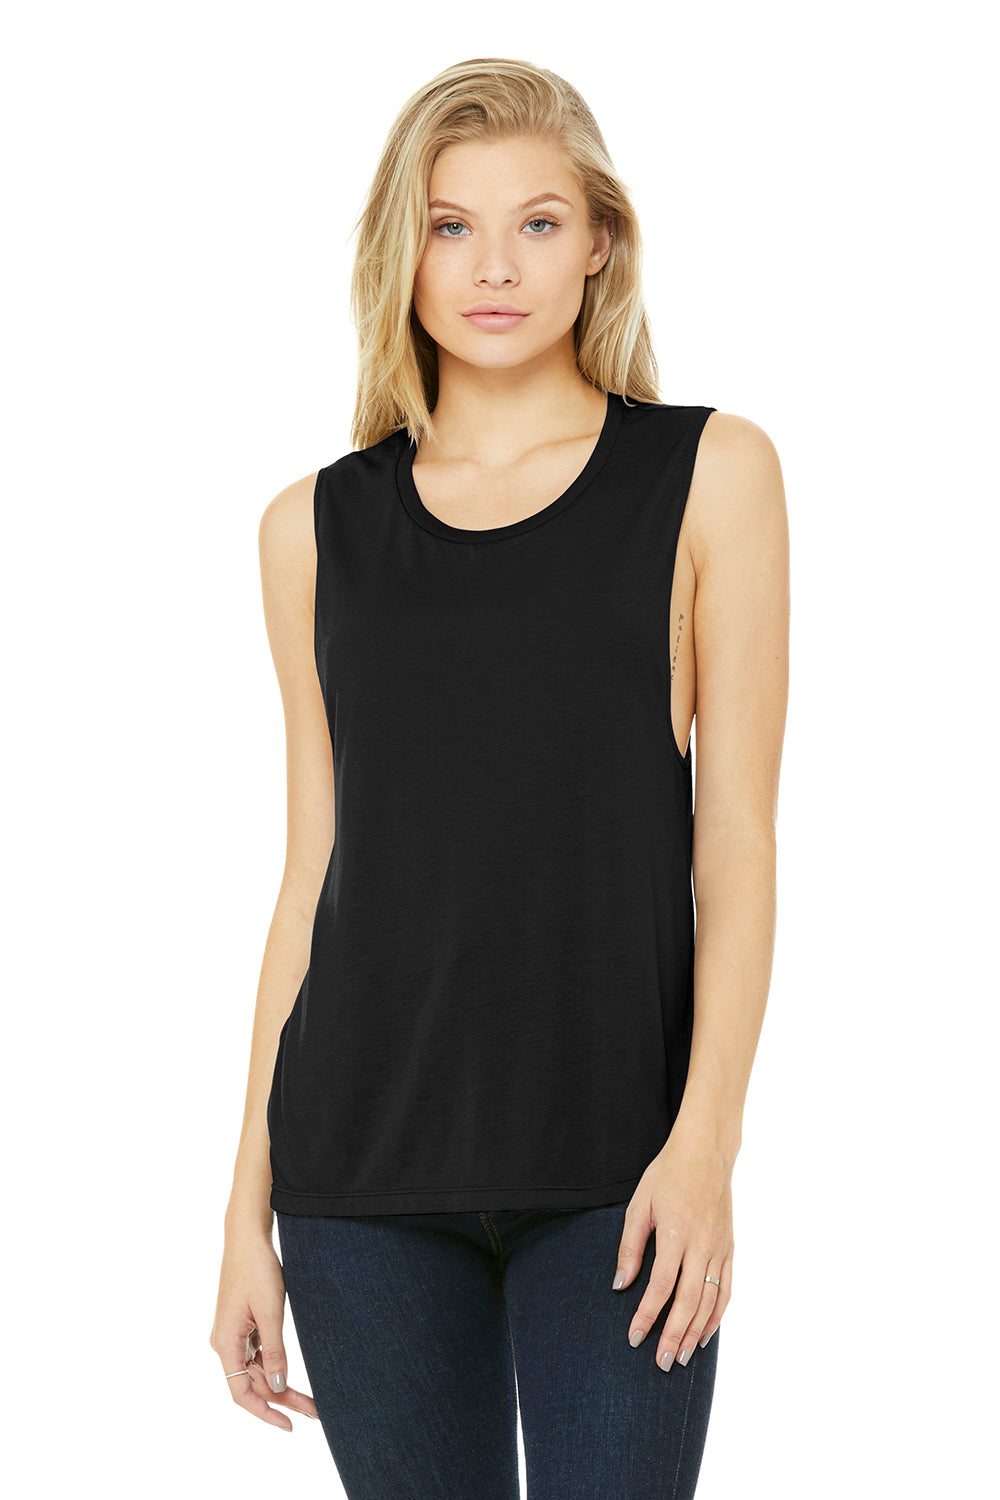 Bella + Canvas BC8803/B8803/8803 Womens Flowy Muscle Tank Top Black Model Front